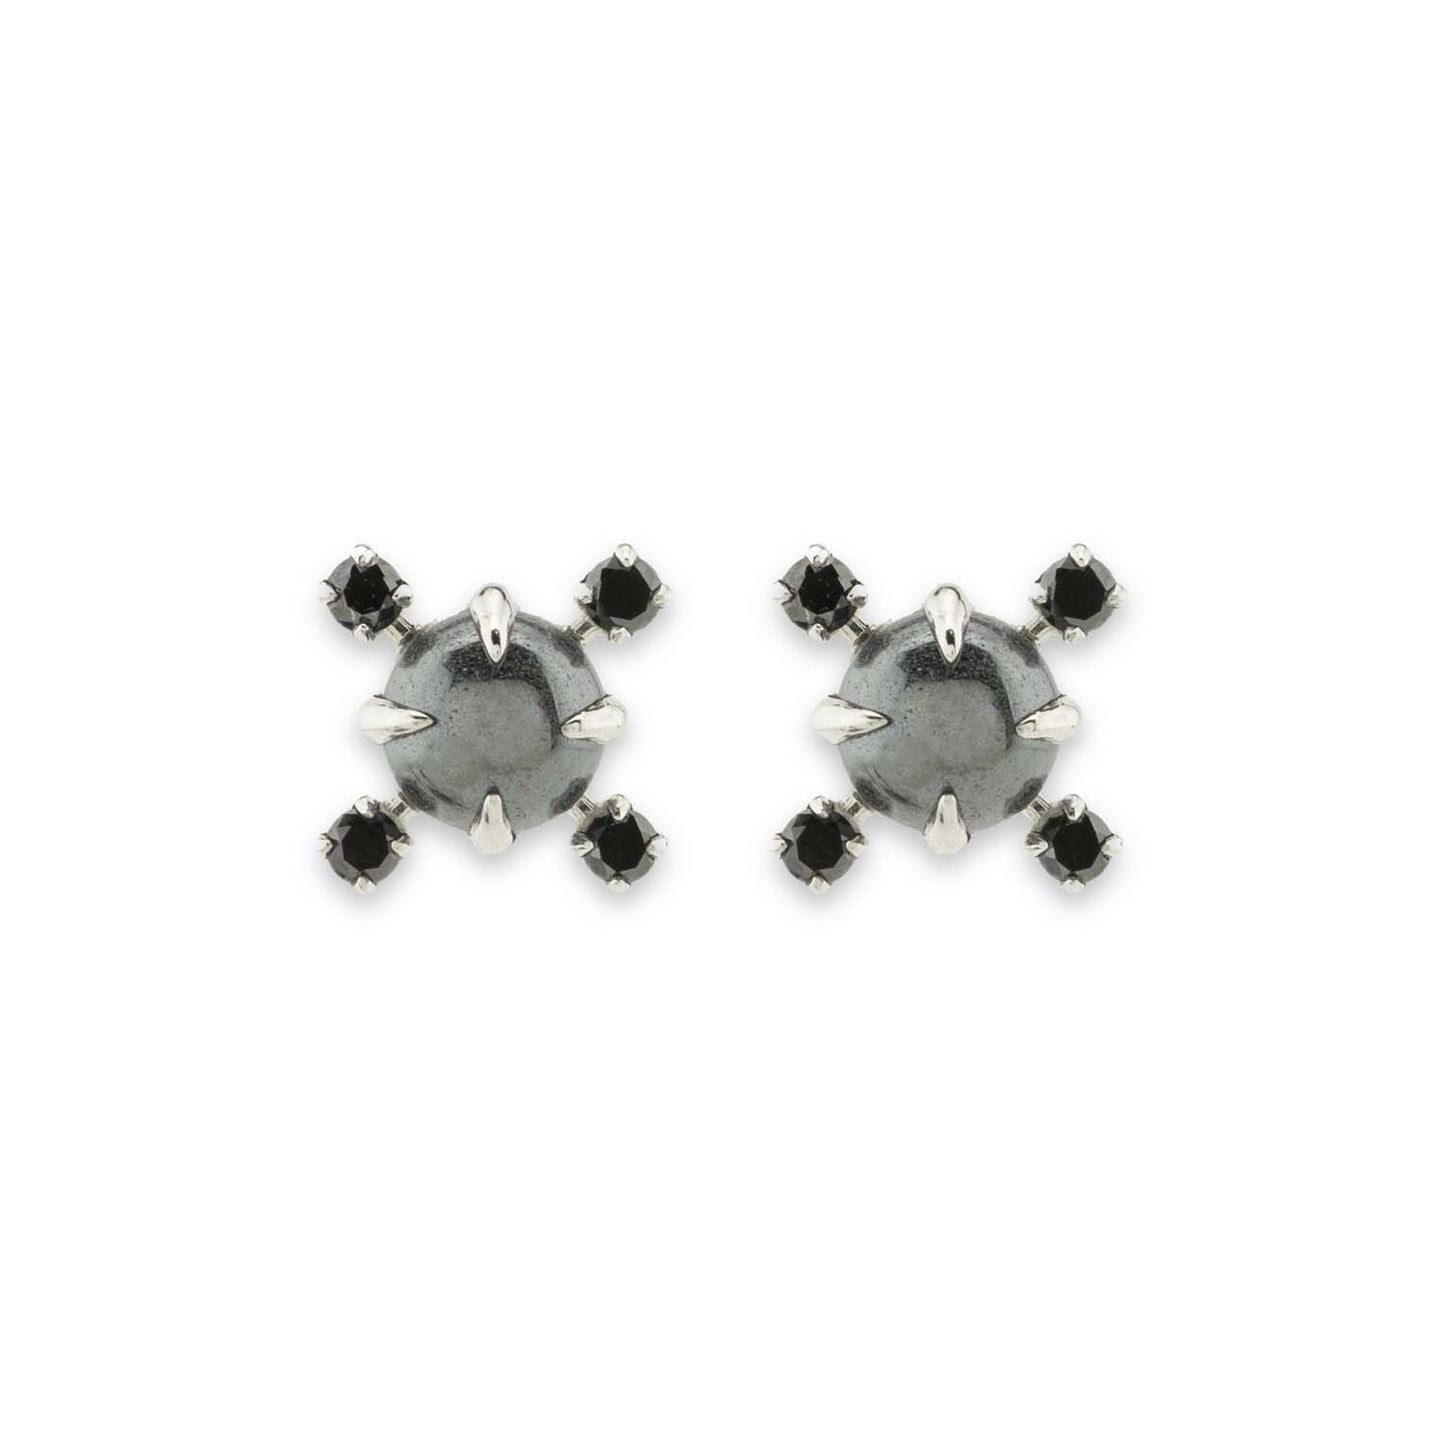 Hematite and sterling silver stud earrings with 4 black diamonds, on white background.